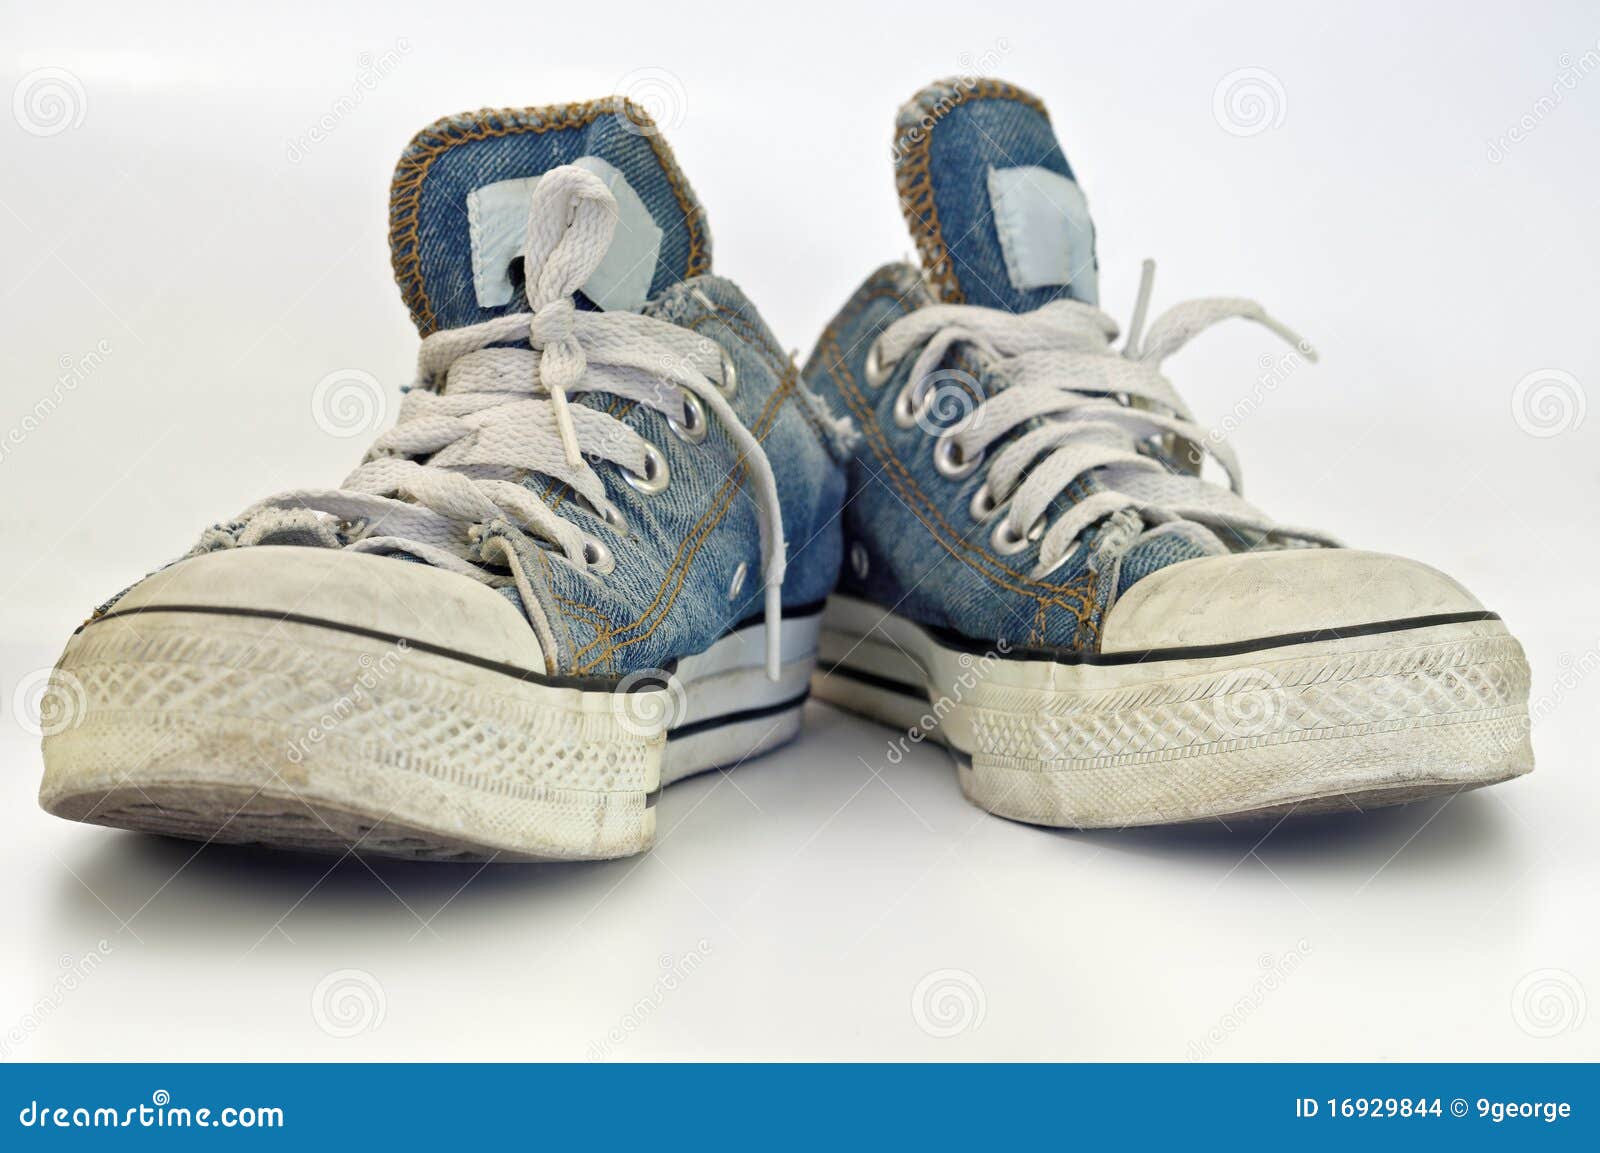 Old, dirty sneakers stock photo. Image of boot, background - 16929844